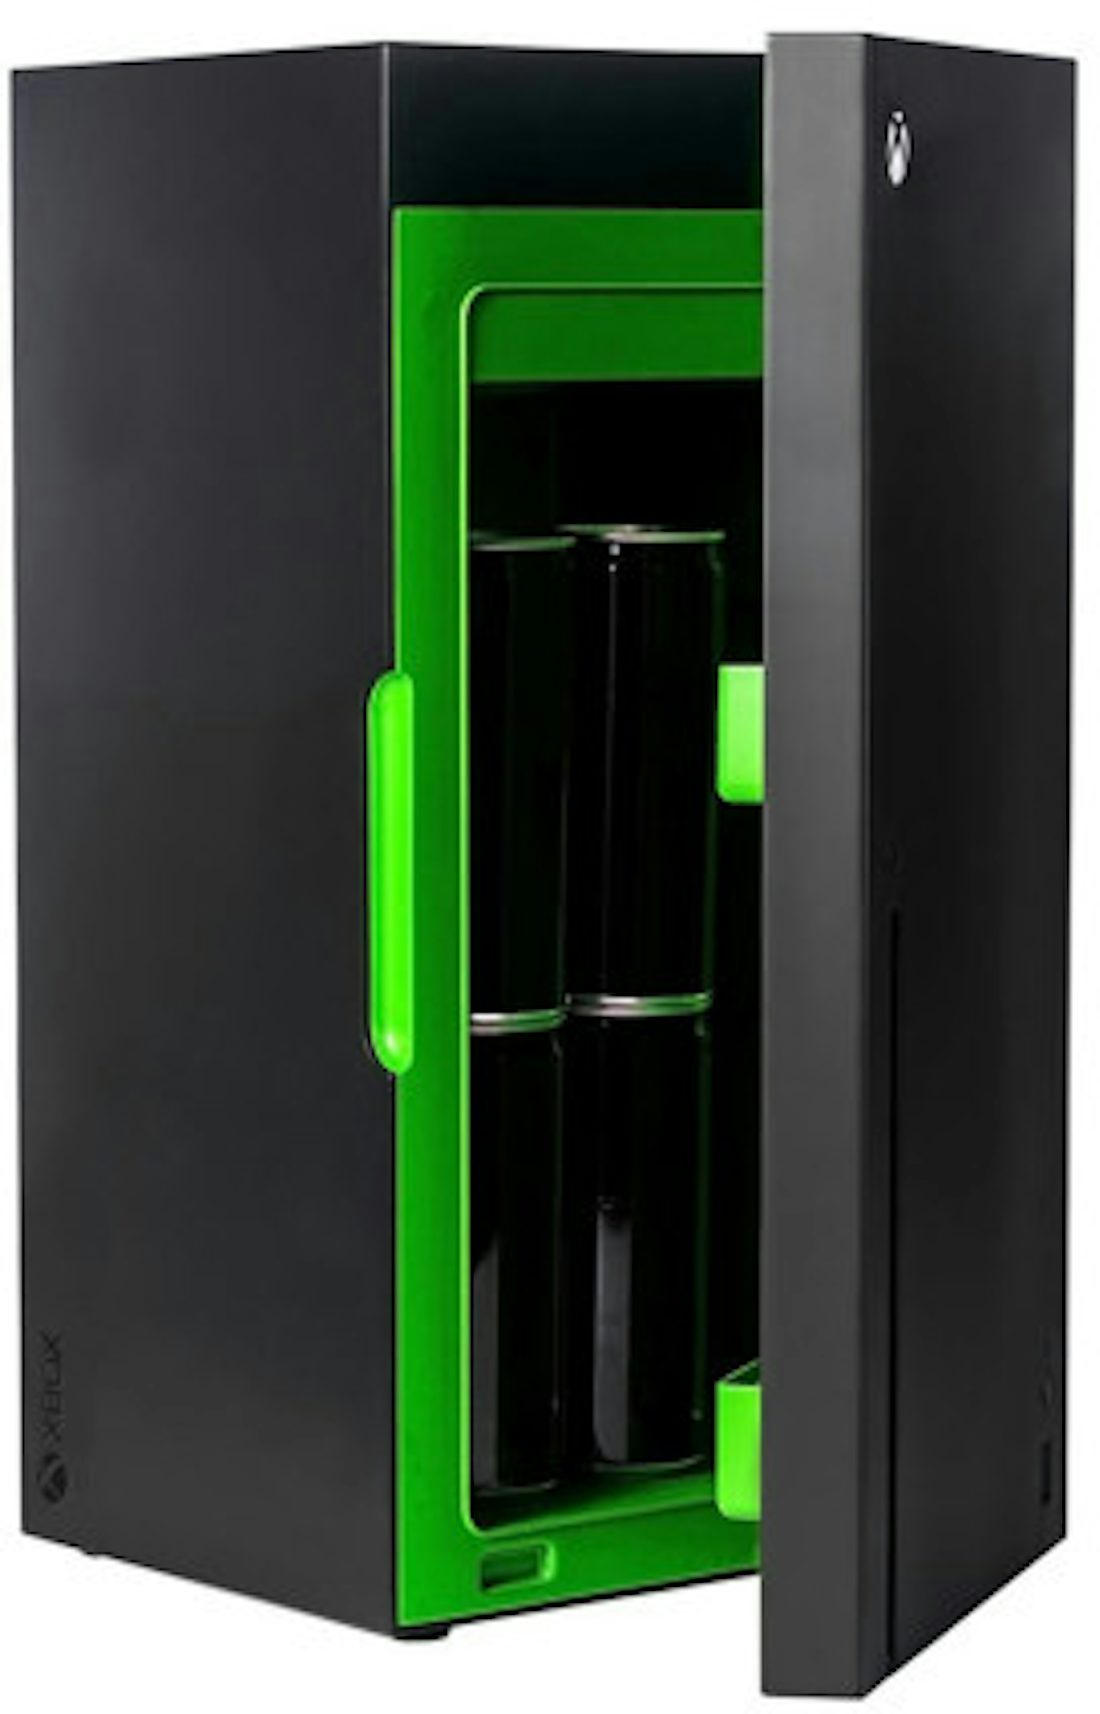 Xbox Has Created Another New Mini Fridge, And It's Easily The